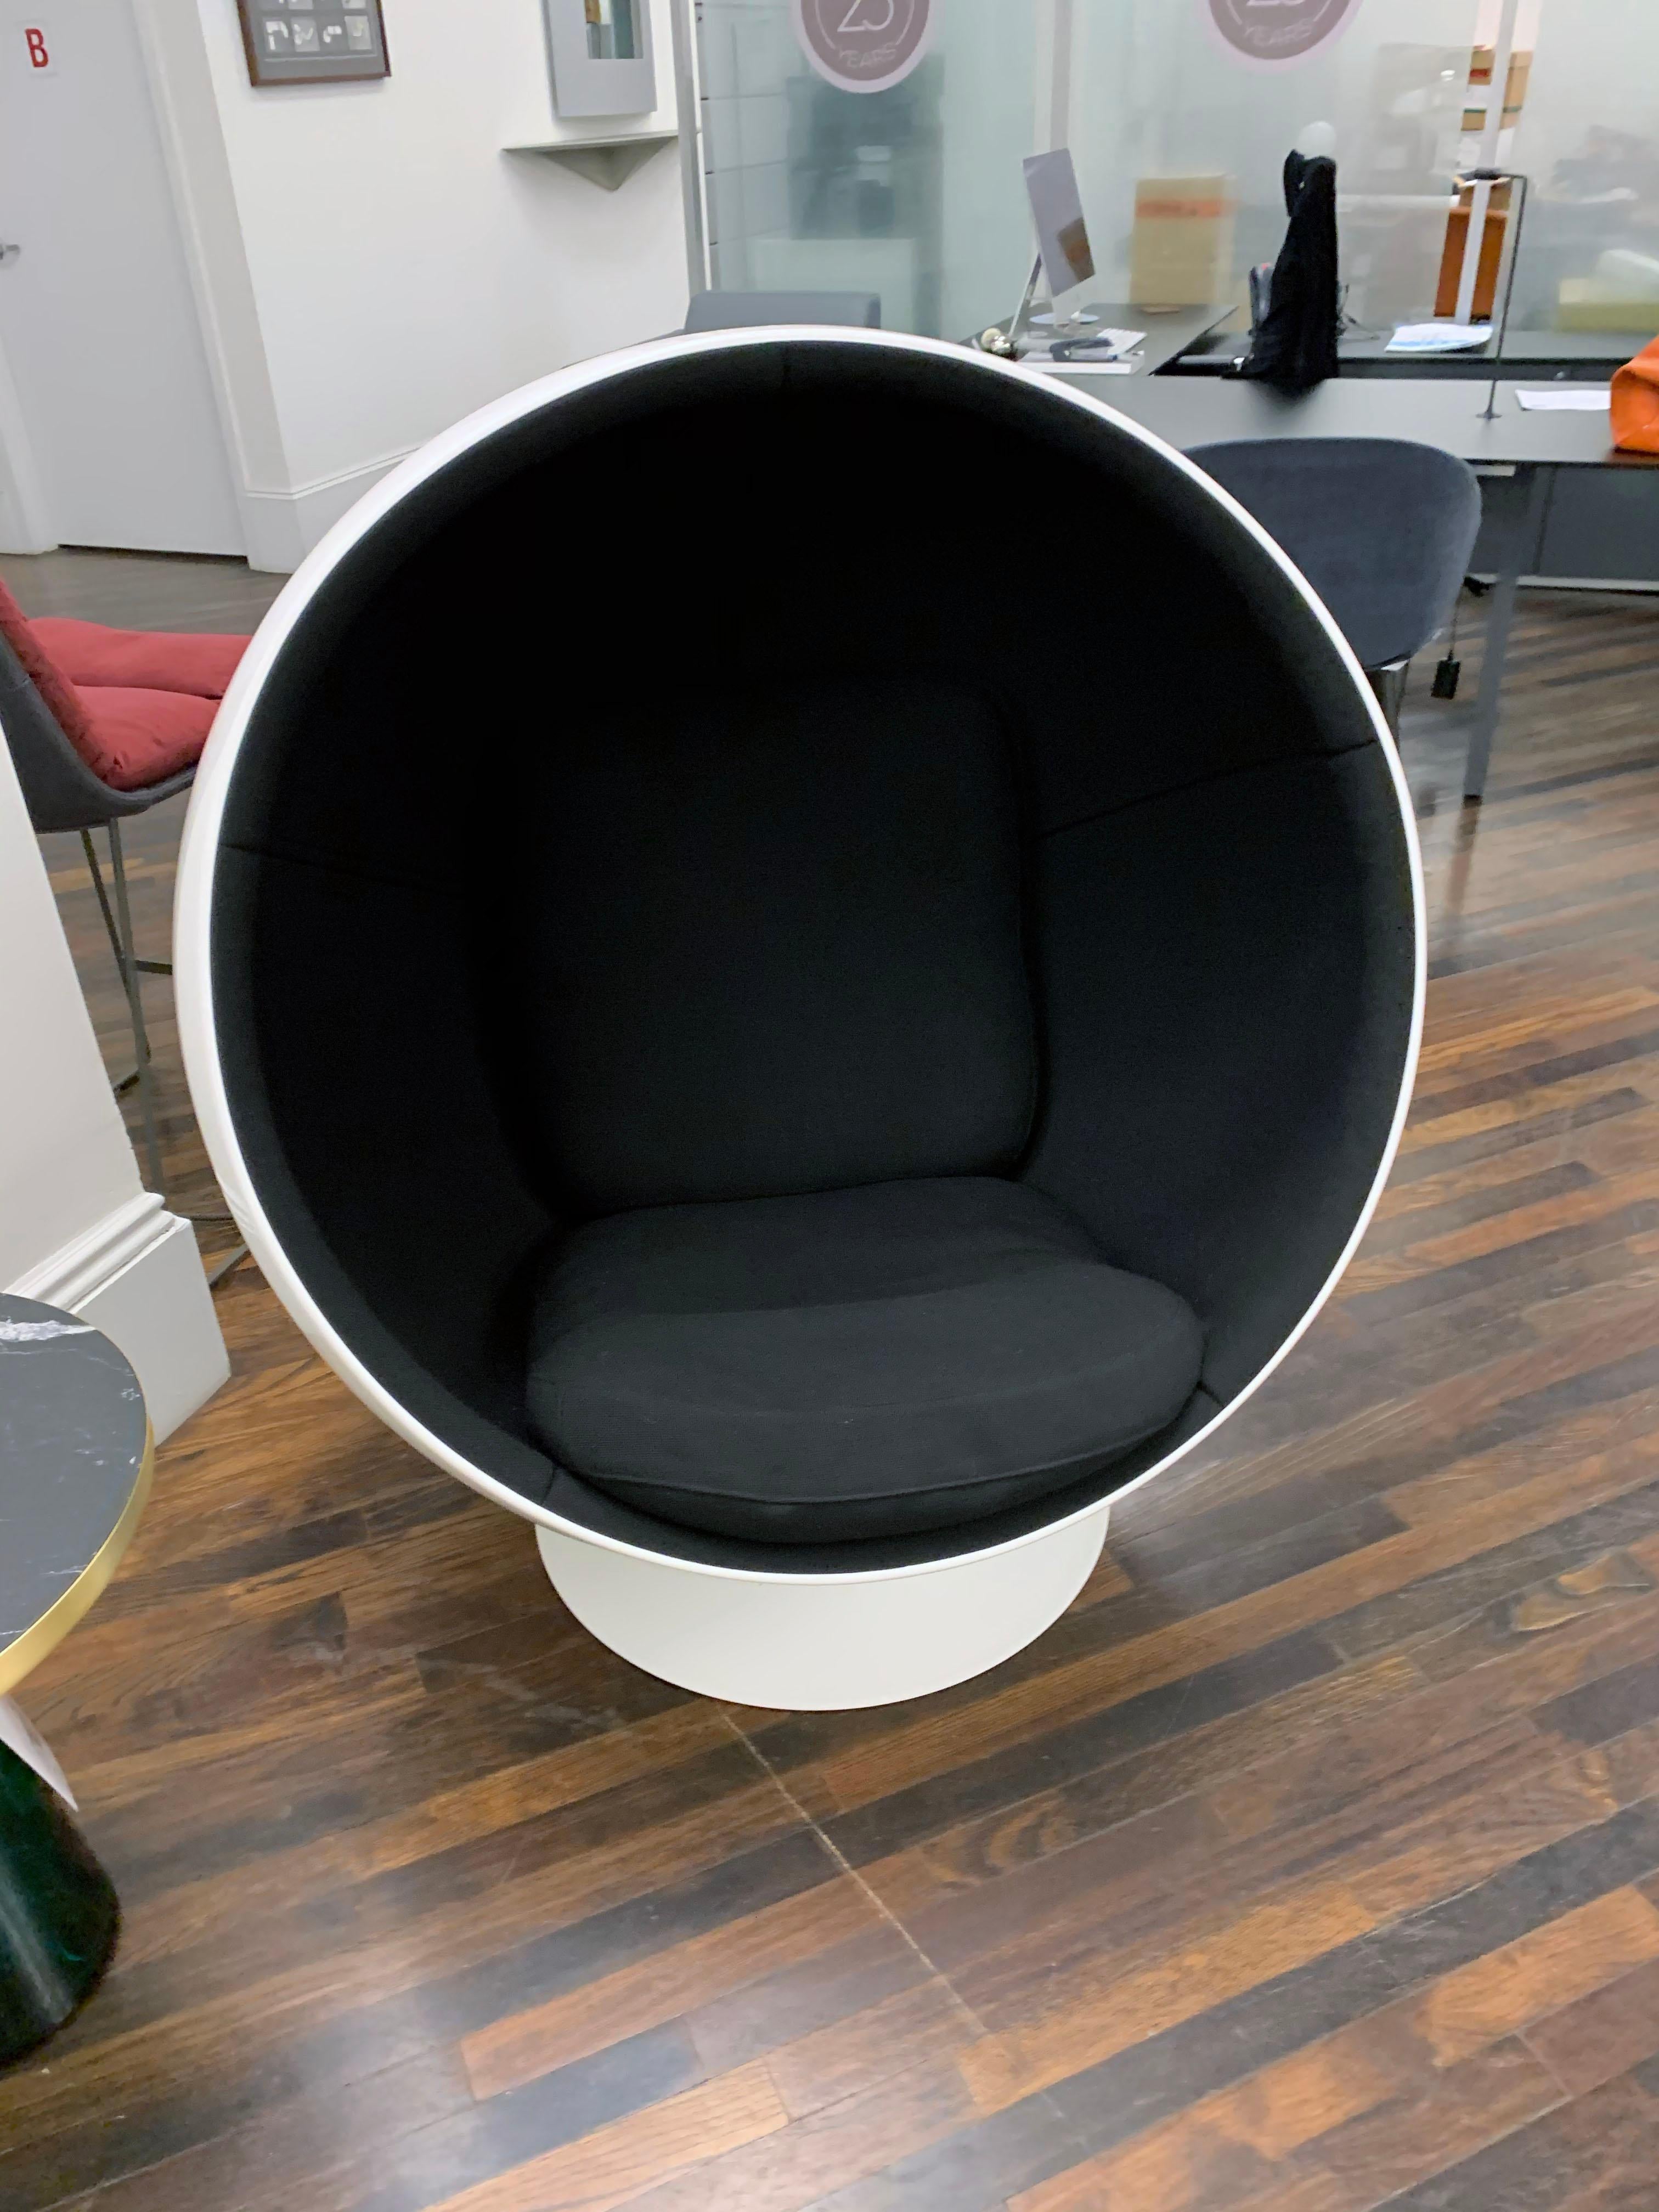 Iconic Eero Aarnio Black and White Swivel Ball Lounge Chair - In Stock 4